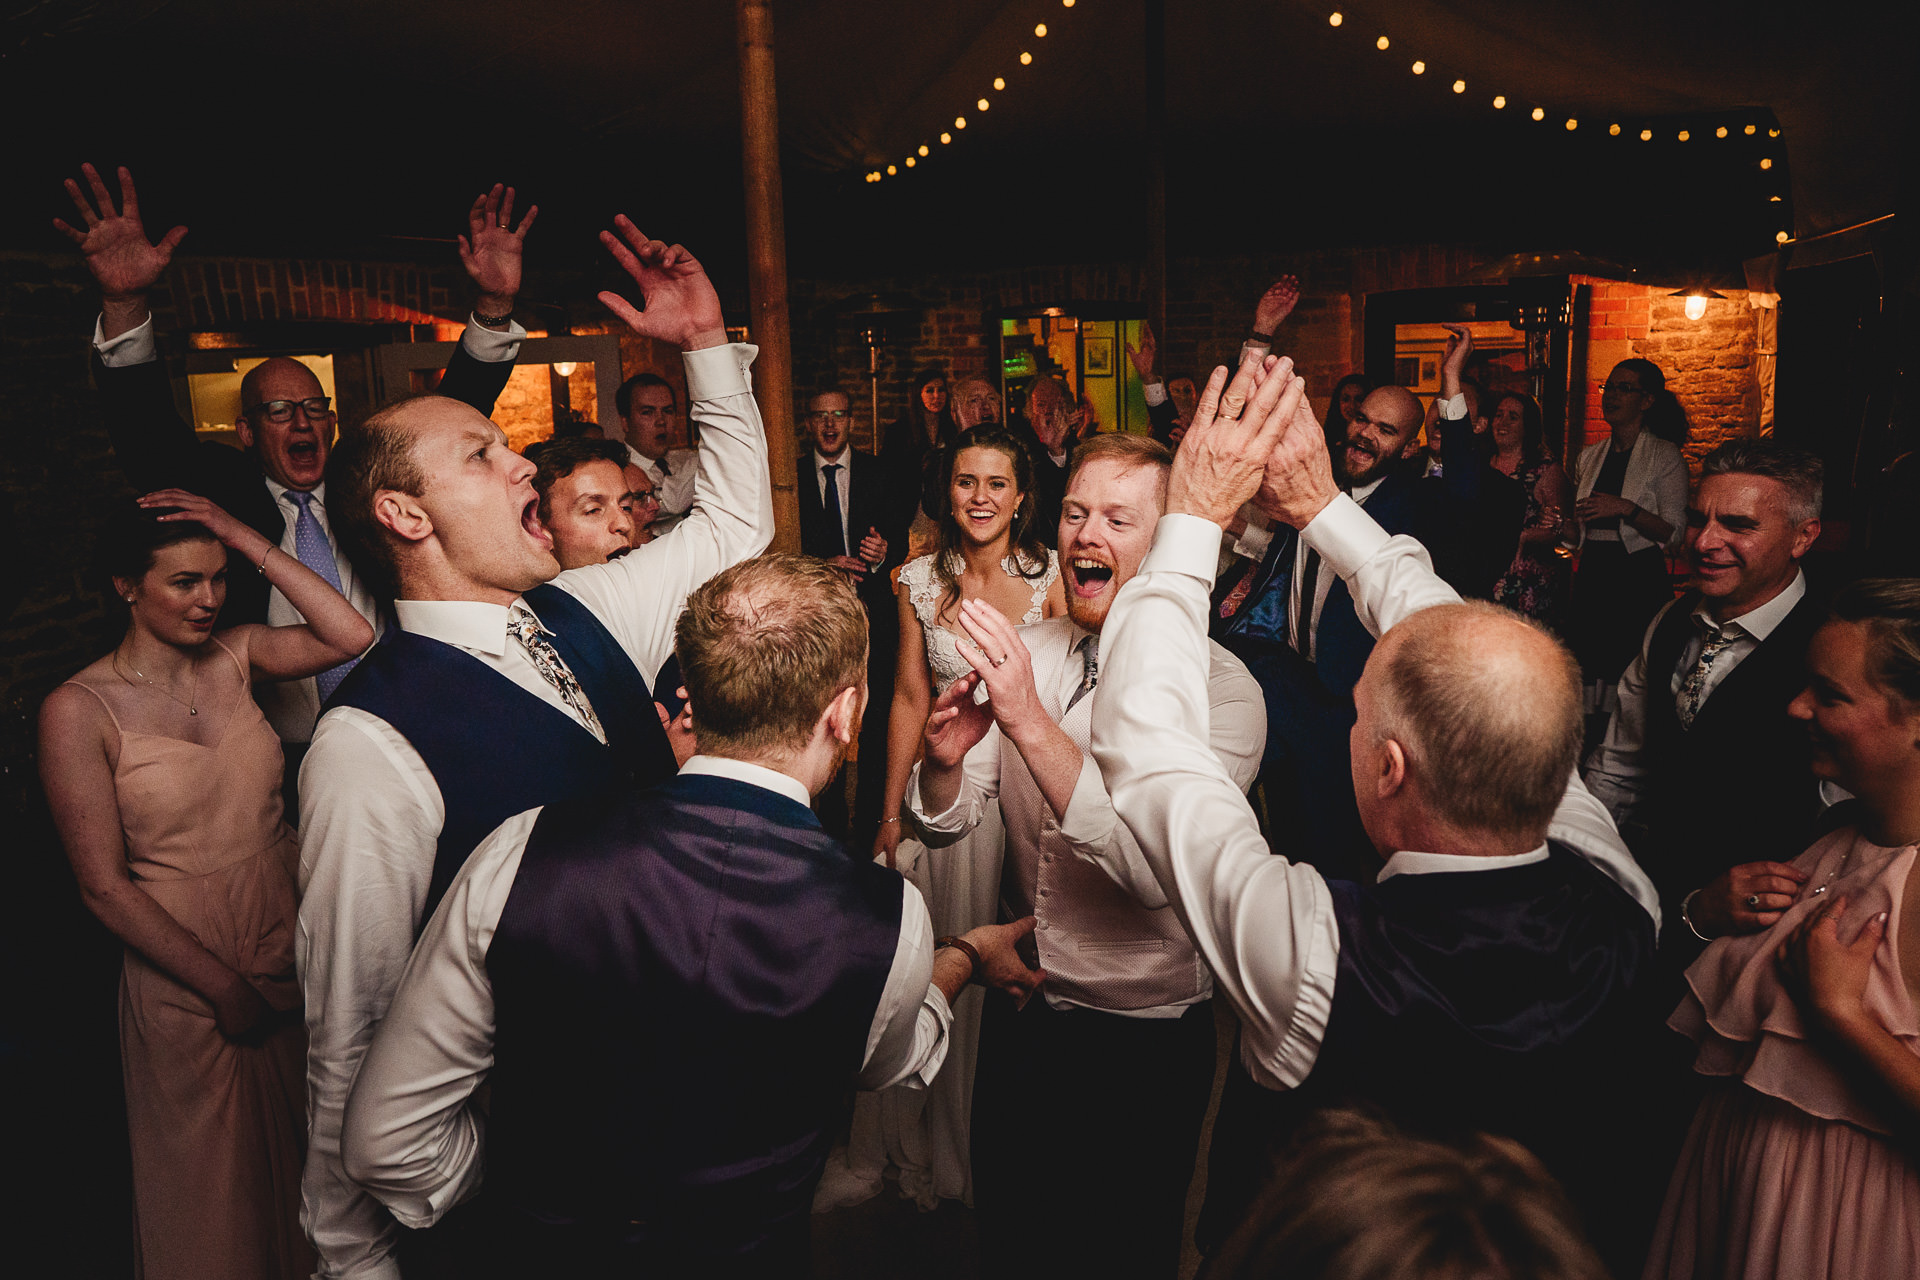 Wedding guests animatedly dancing with hands in the air